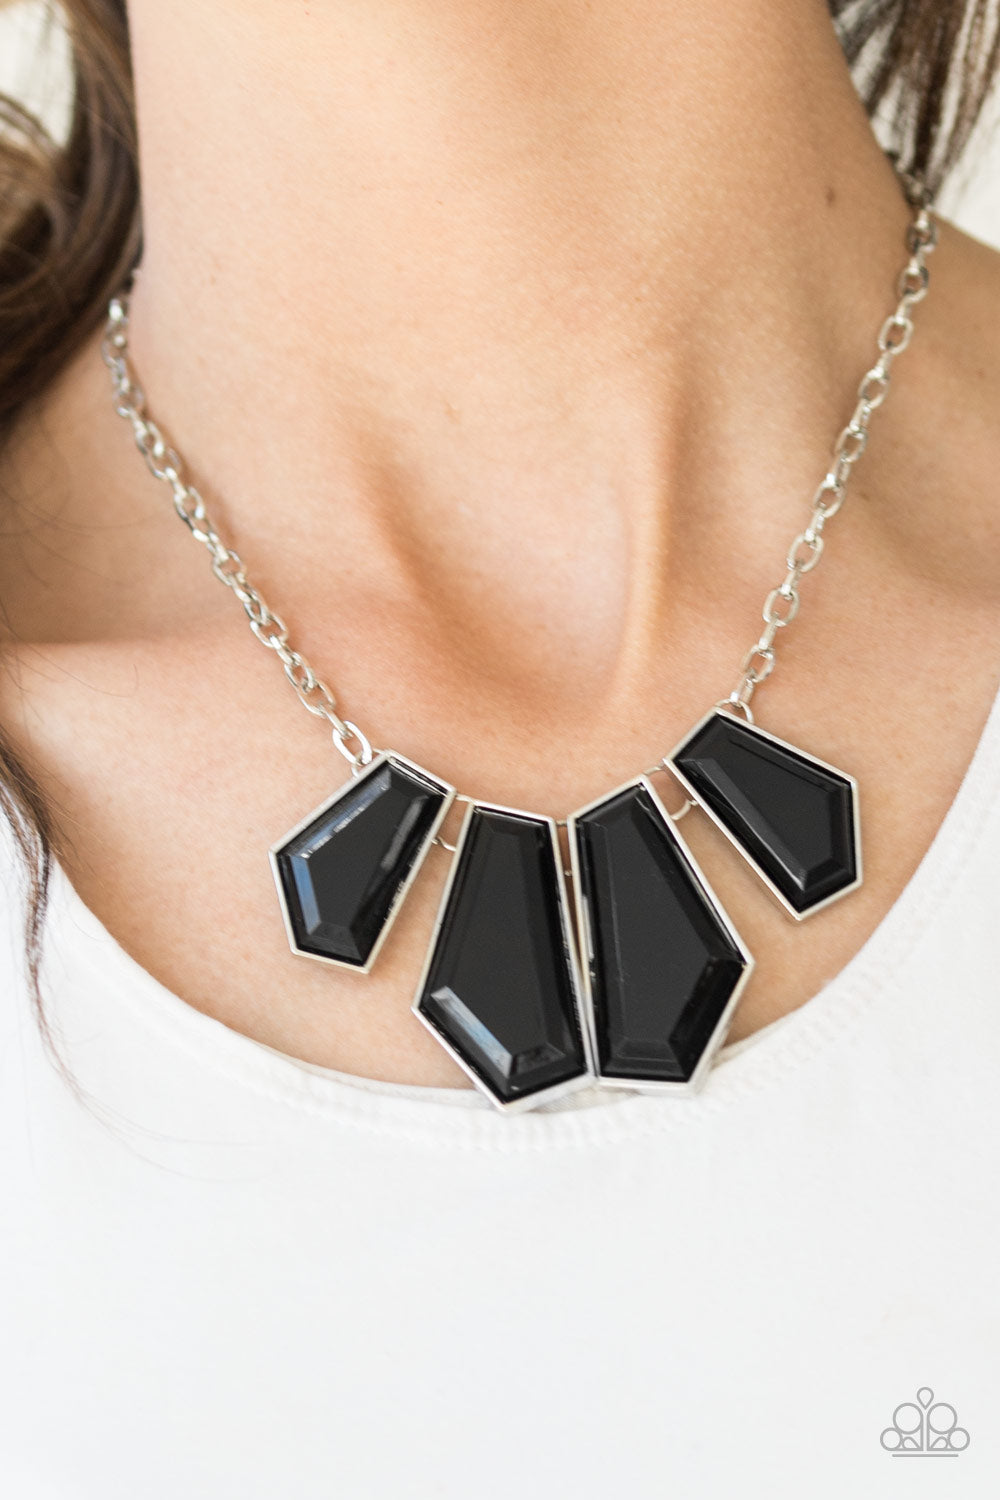 Paparazzi ♥ Get Up and GEO - Black ♥  Necklace